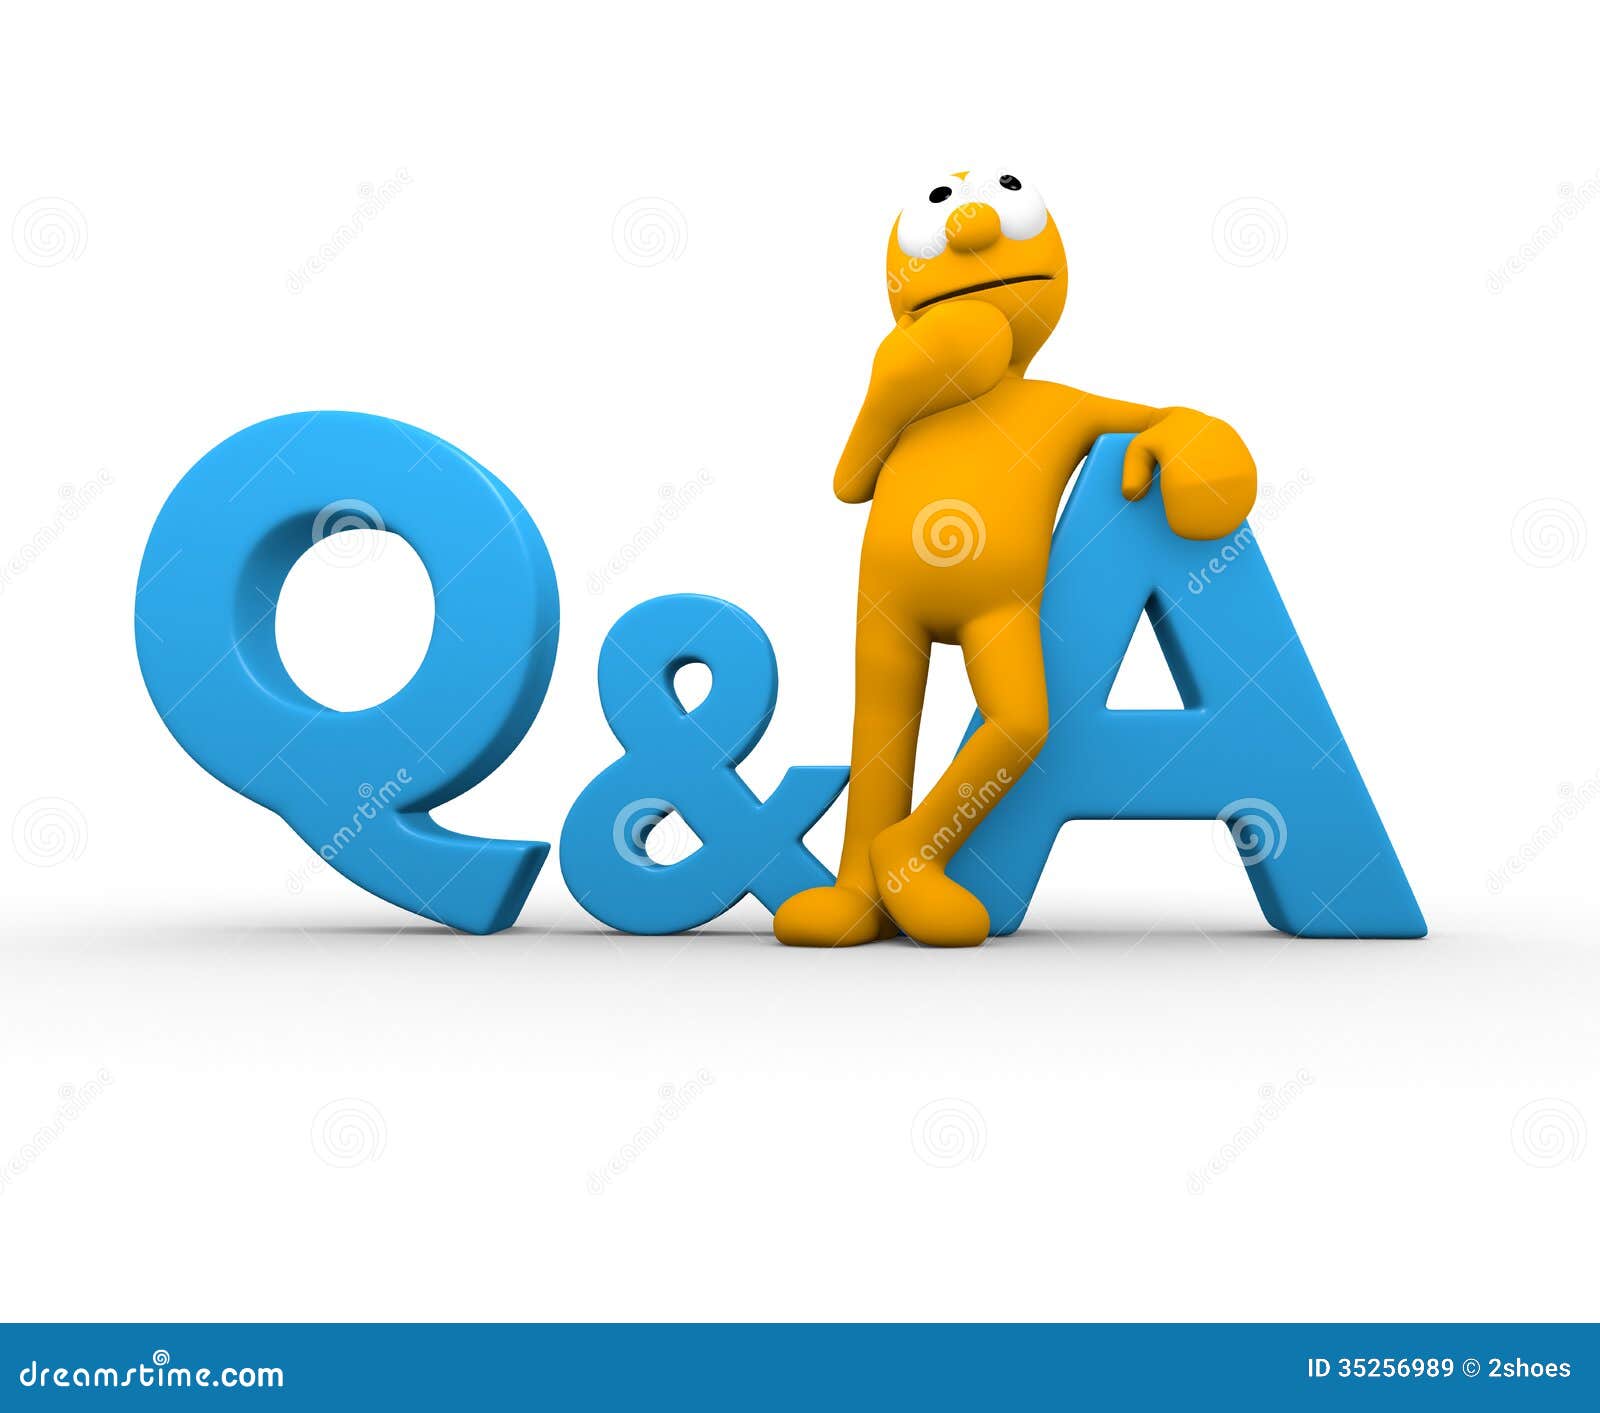 clipart question and answer - photo #8